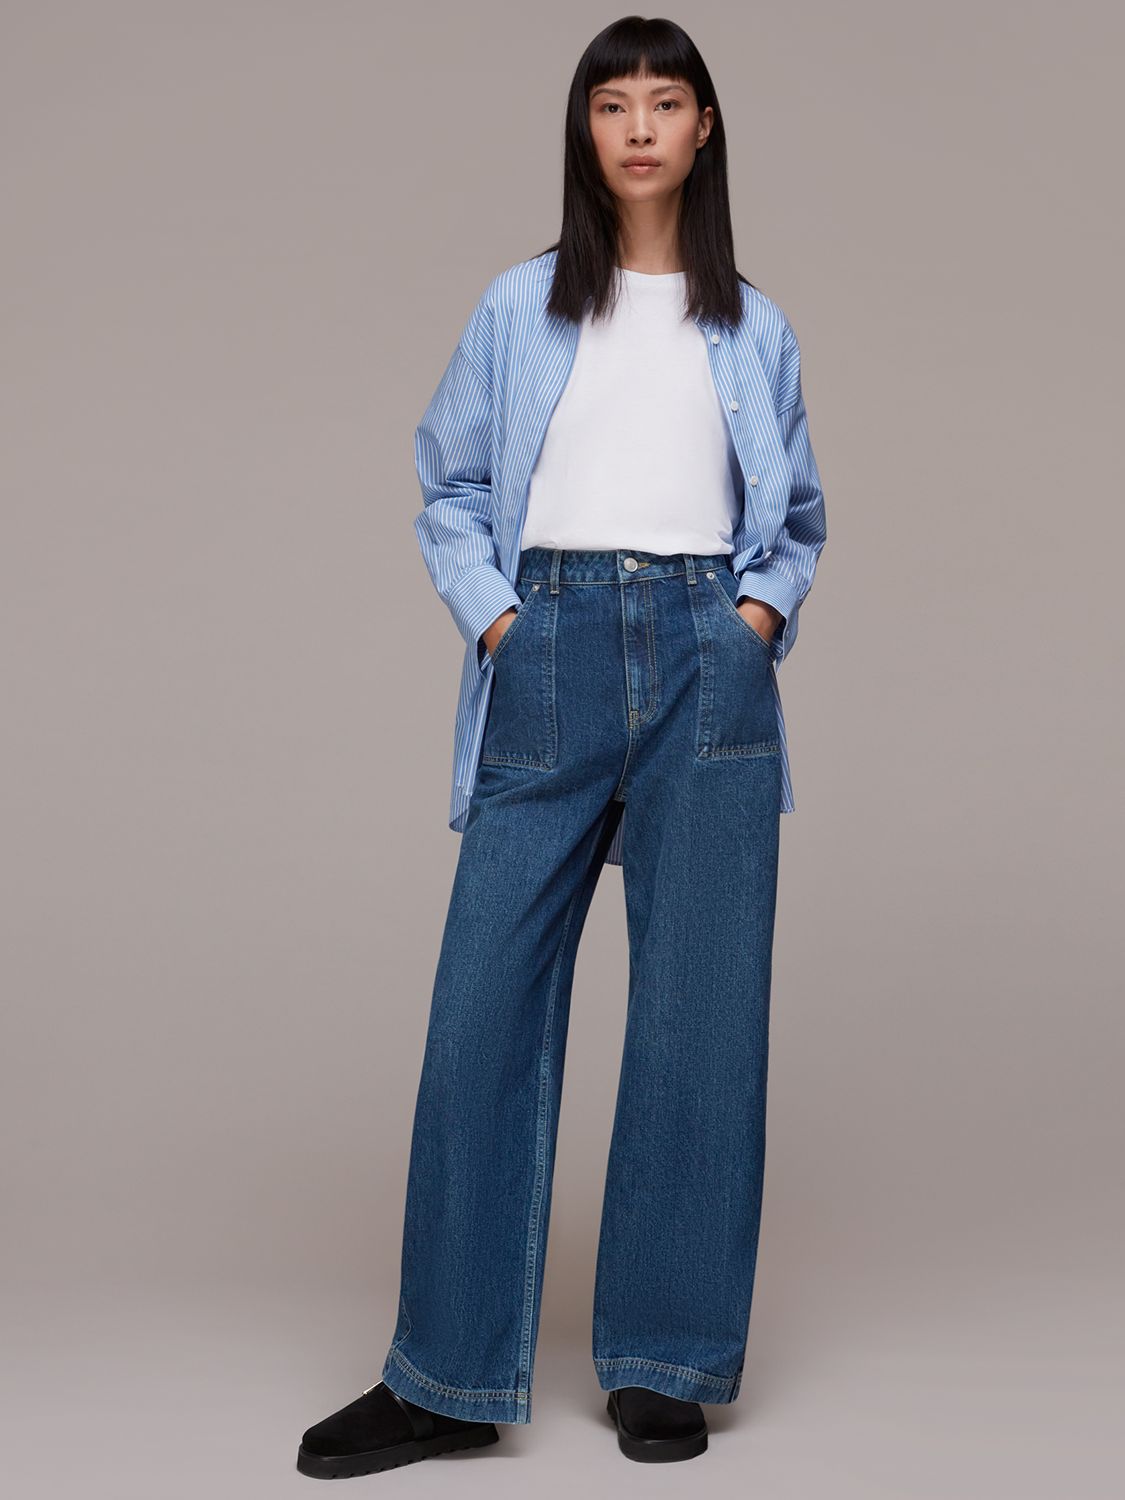 Buy Whistles Petite Authentic Raya Straight Jeans, Blue Online at johnlewis.com